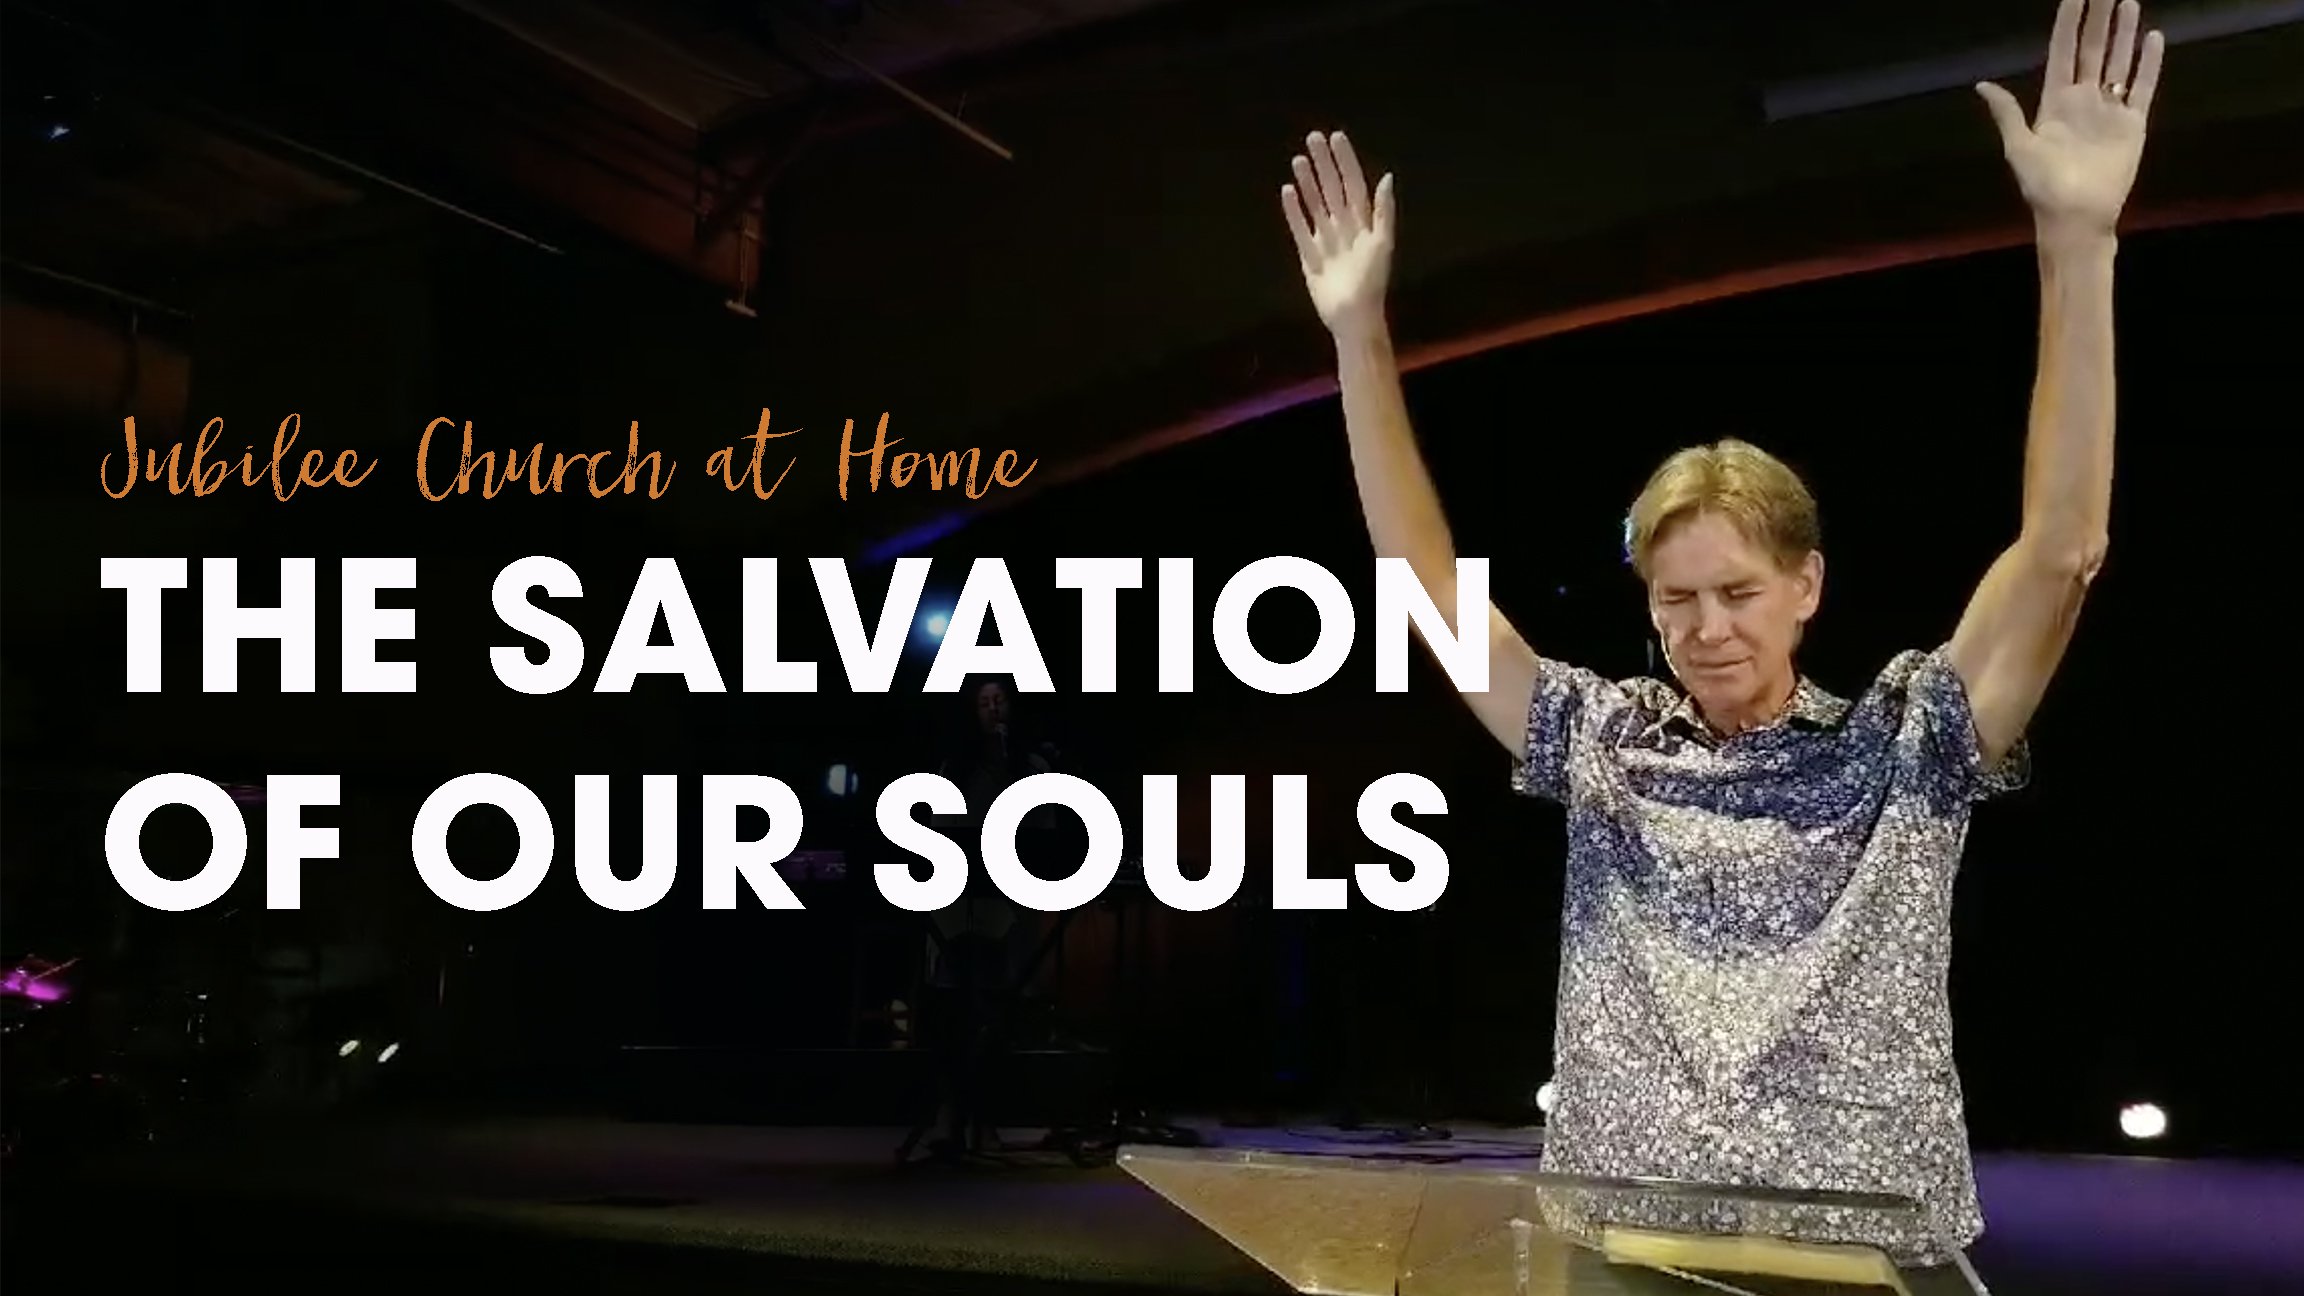 The Salvation of Our Souls